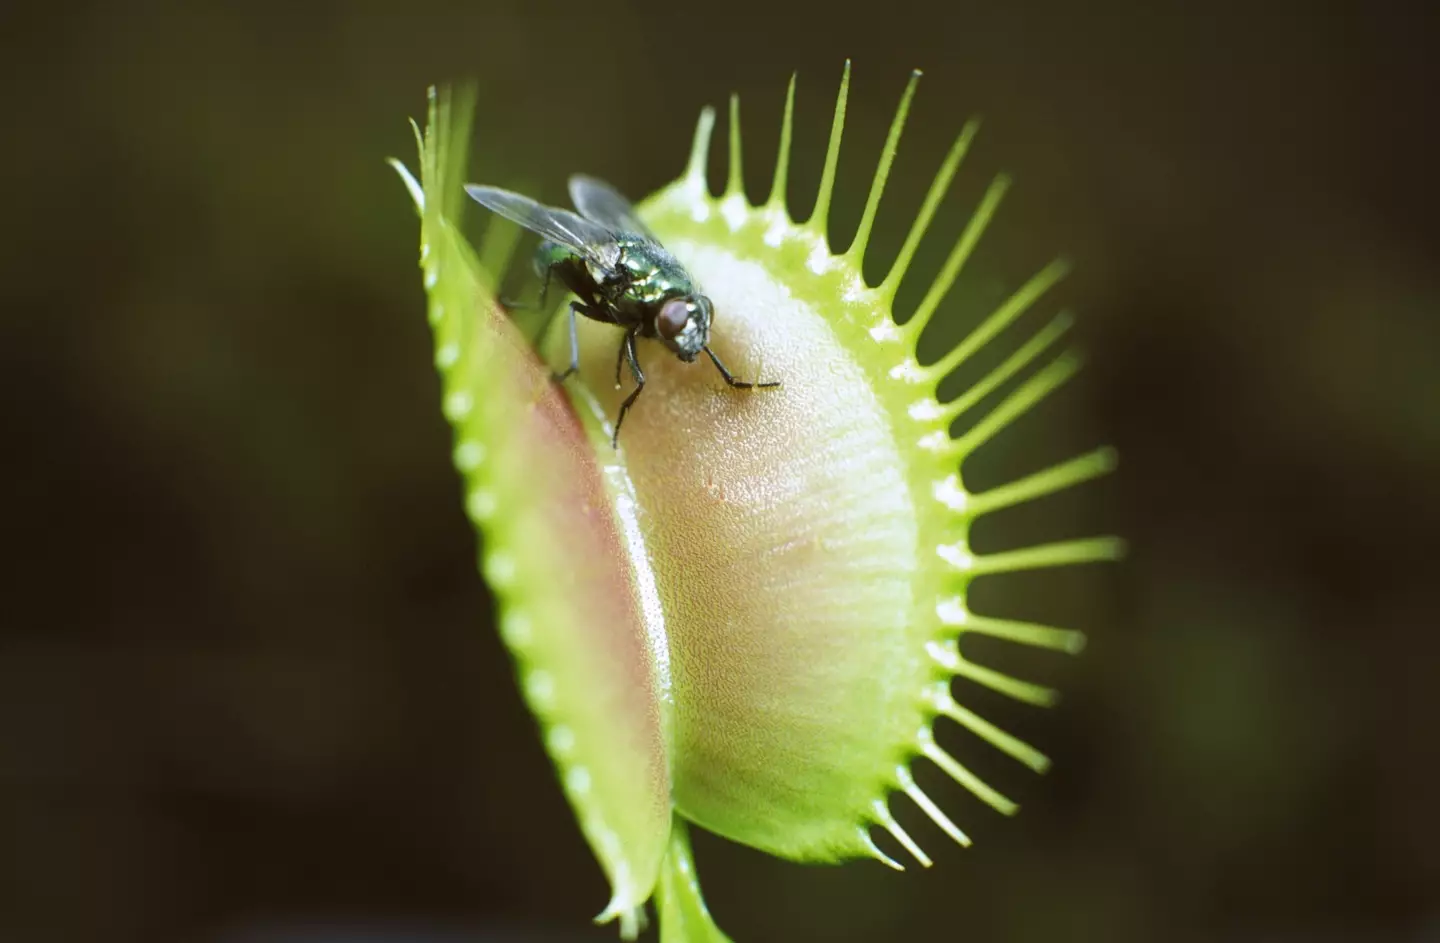 A carnivorous plant expert has tested whether Venus flytraps can consume human flesh.